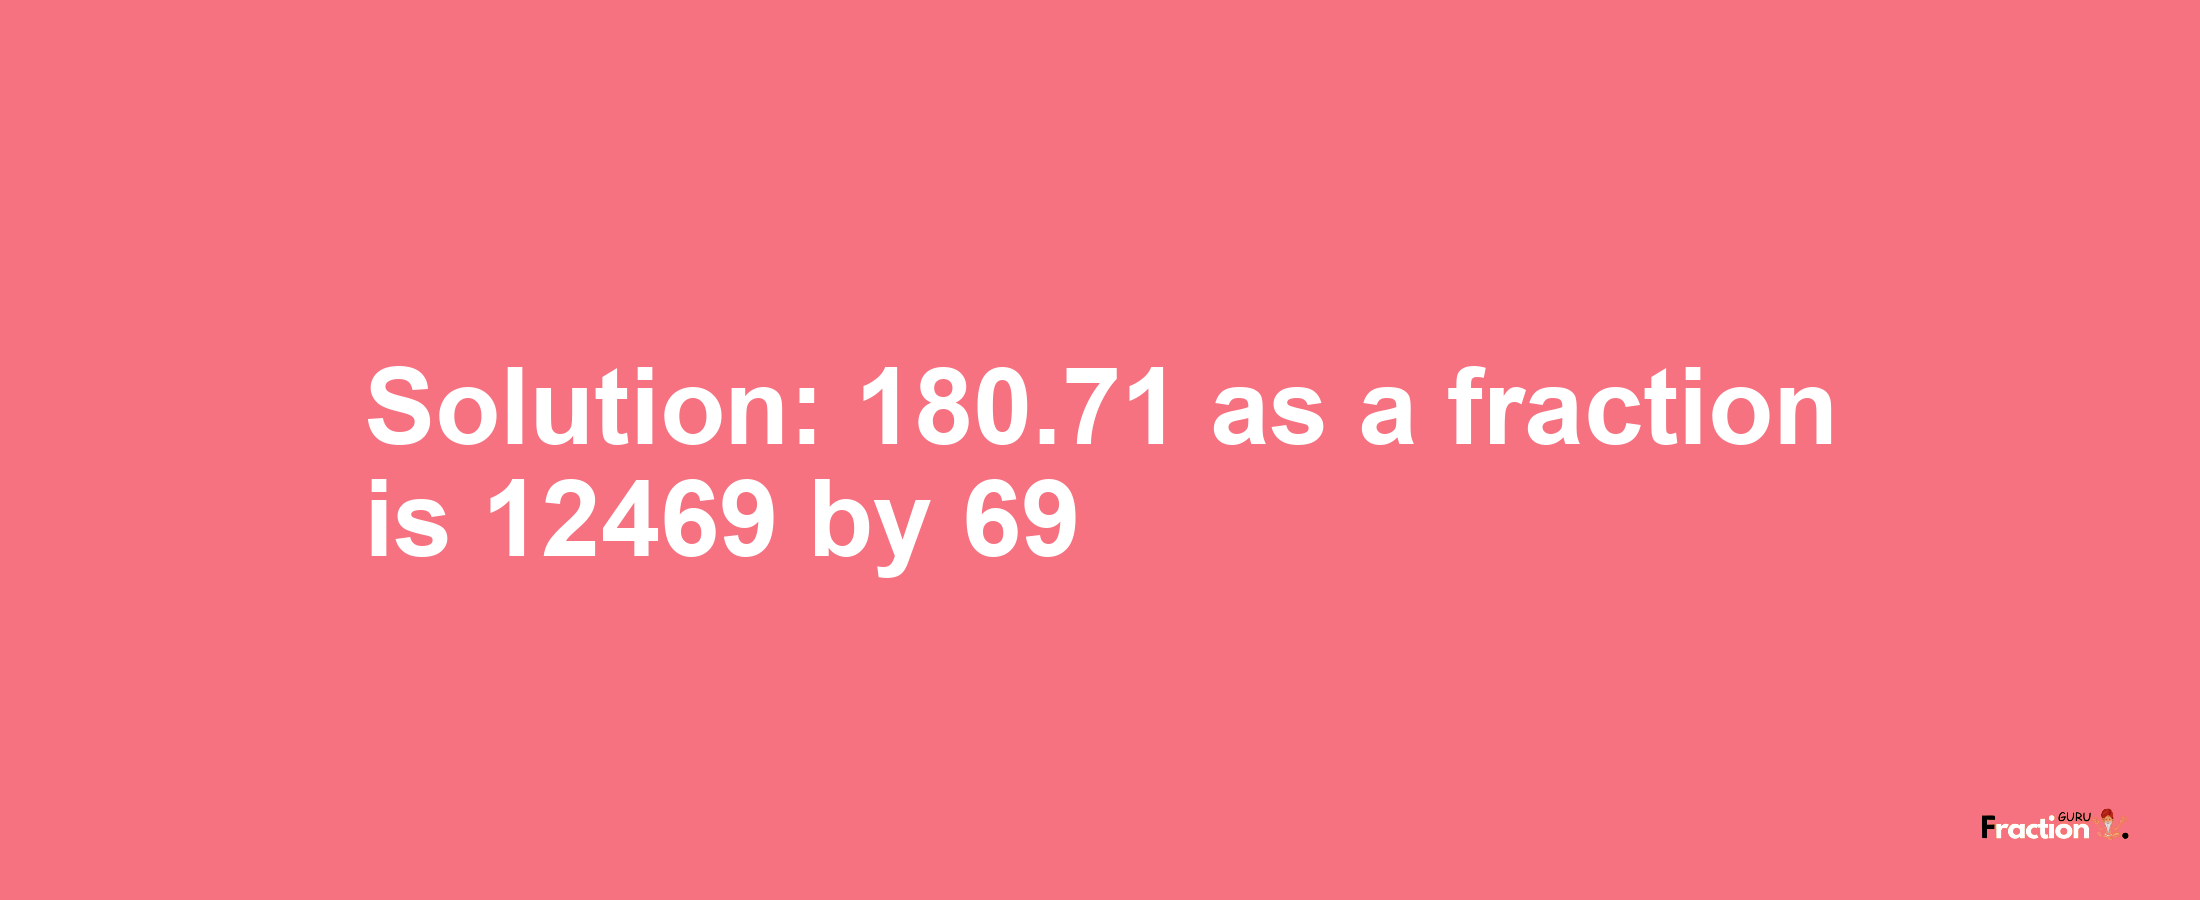 Solution:180.71 as a fraction is 12469/69